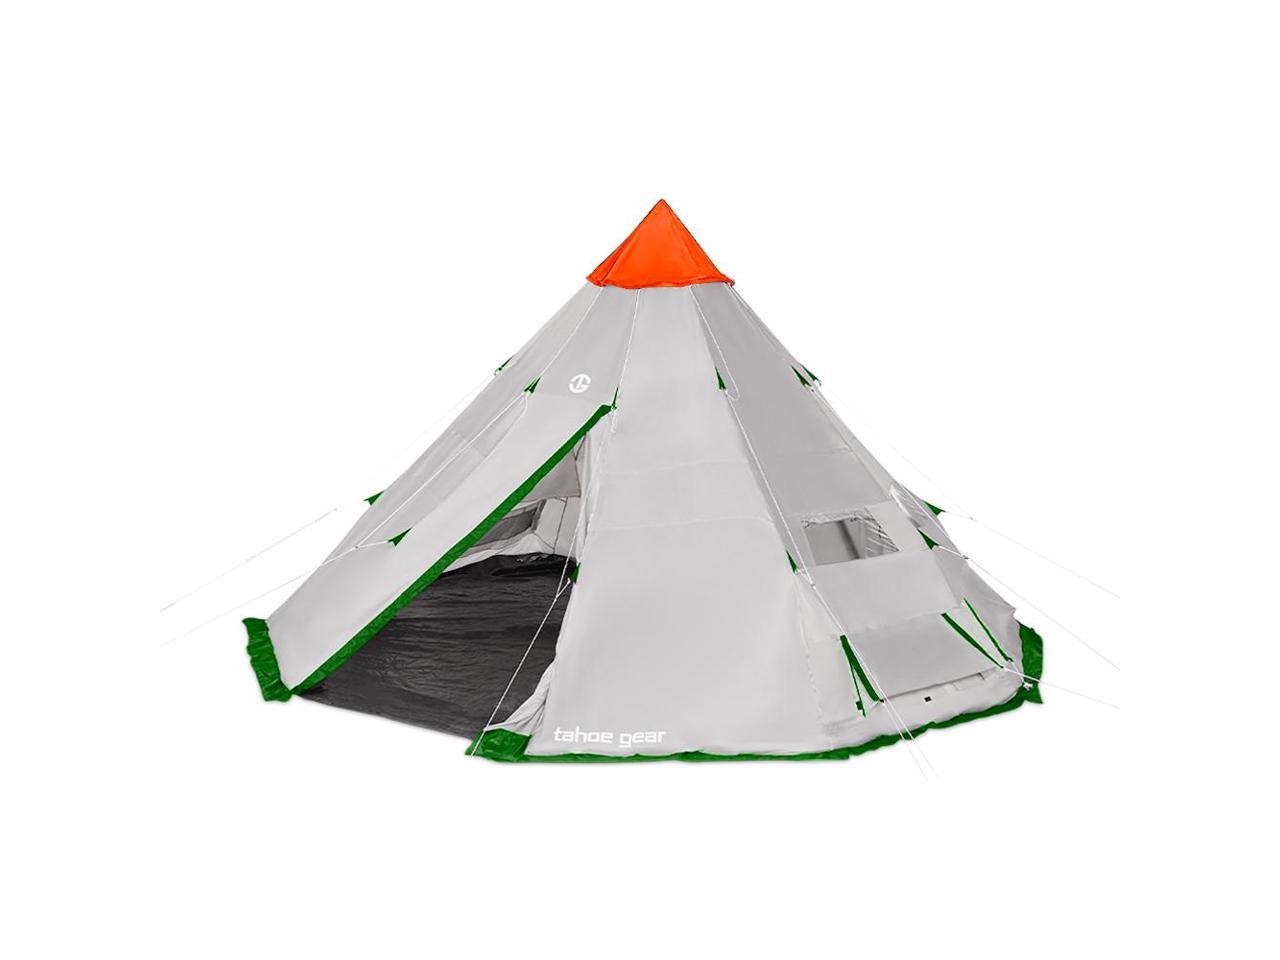 Deluxe Teepee Camping Tent Vented Roof 12 Person Capacity 18 ft x 18 ft. 